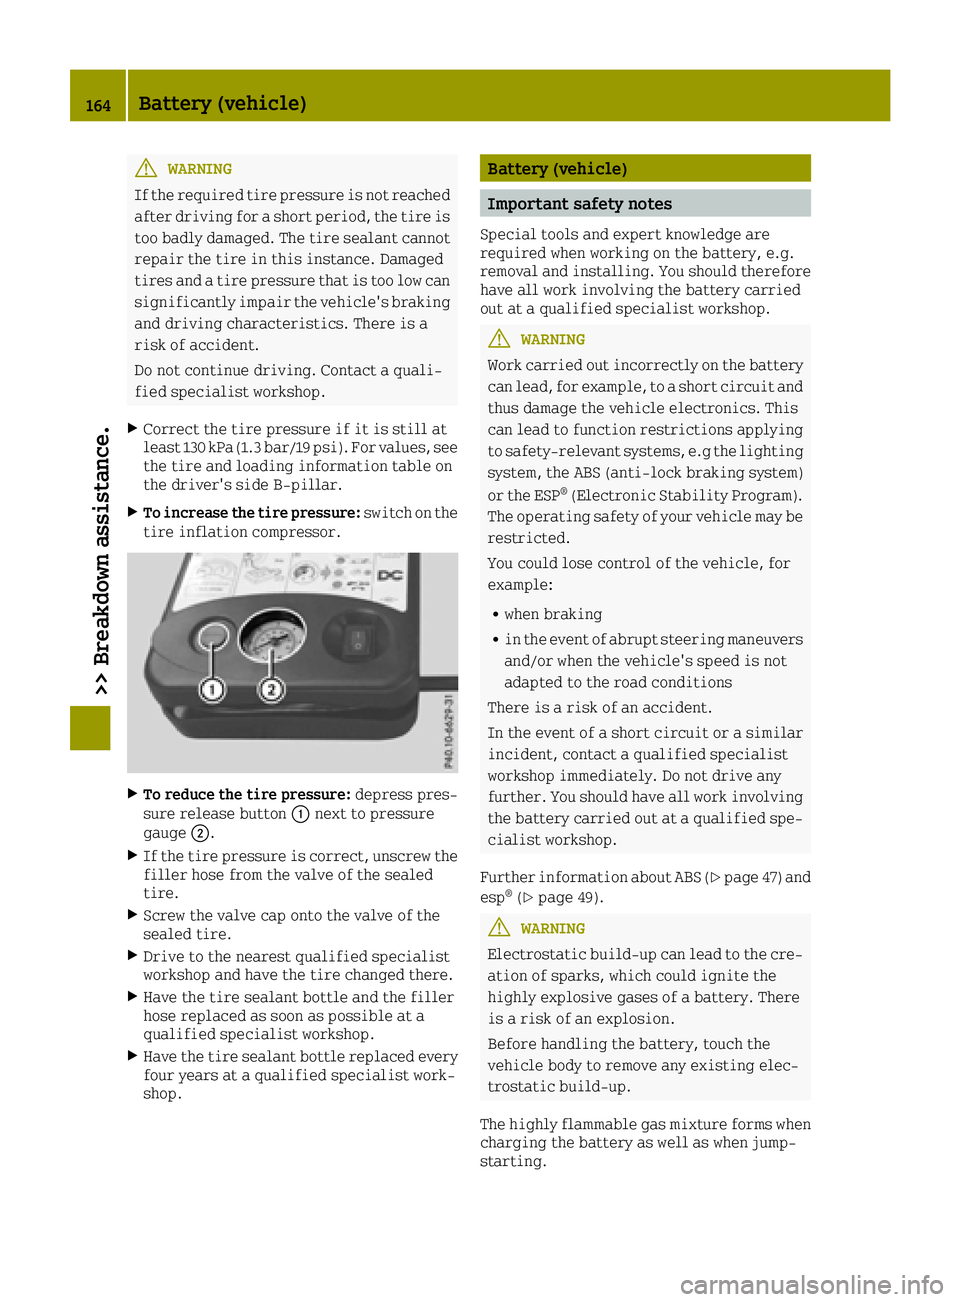 SMART FORTWO 2016  Owners Manual GWARNING
If the required tire pressure is not reached after driving for a short period, the tire is
too badly damaged. The tire sealant cannot repair the tire in this instance. Damaged
tires and a tir